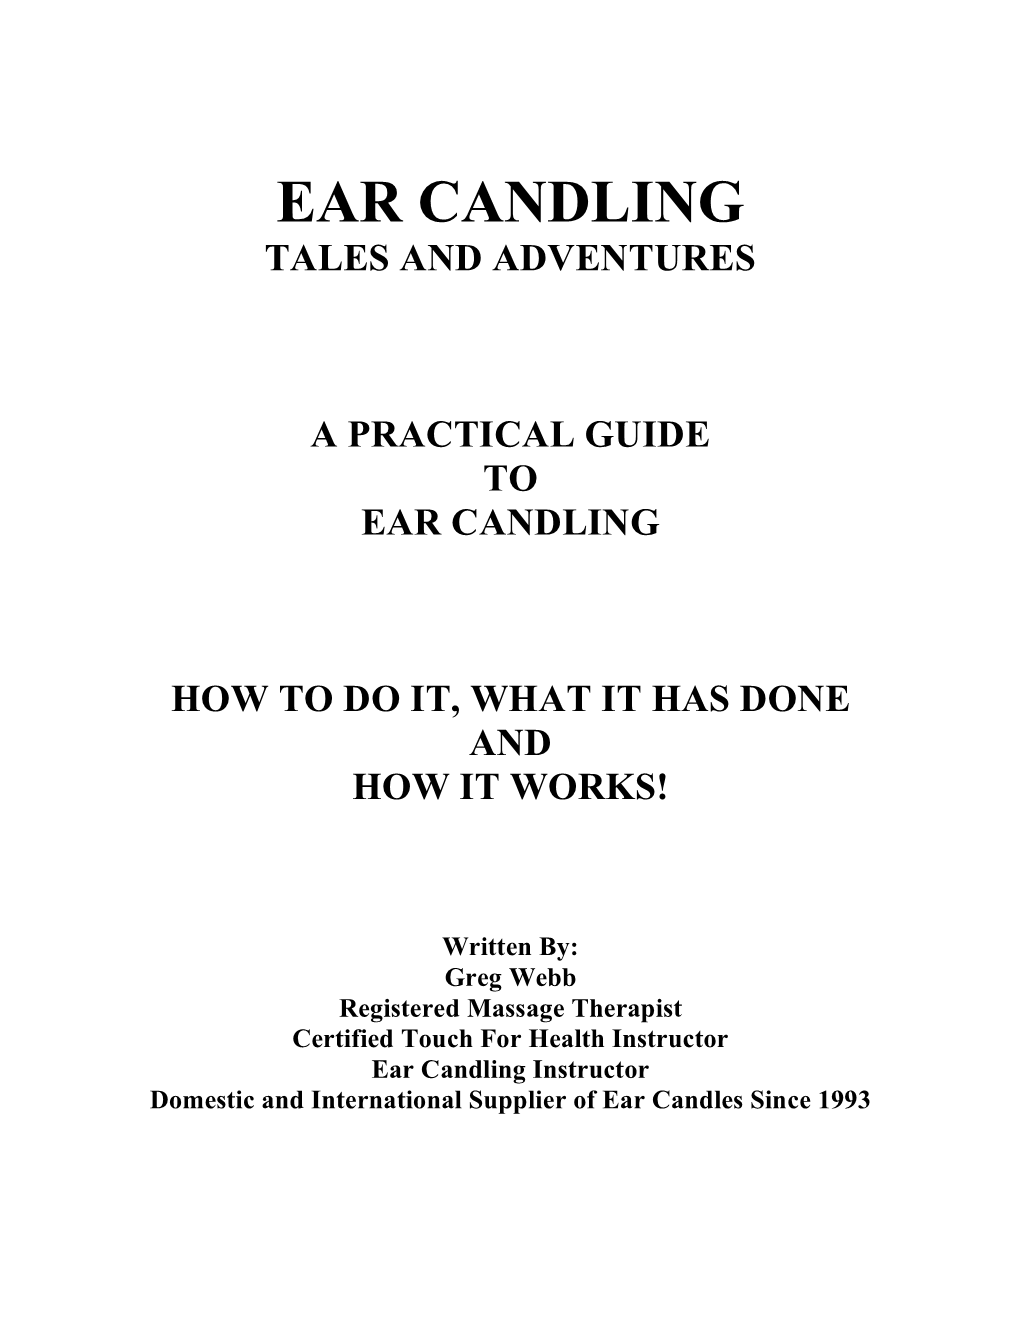 Ear Candling Tales and Adventures